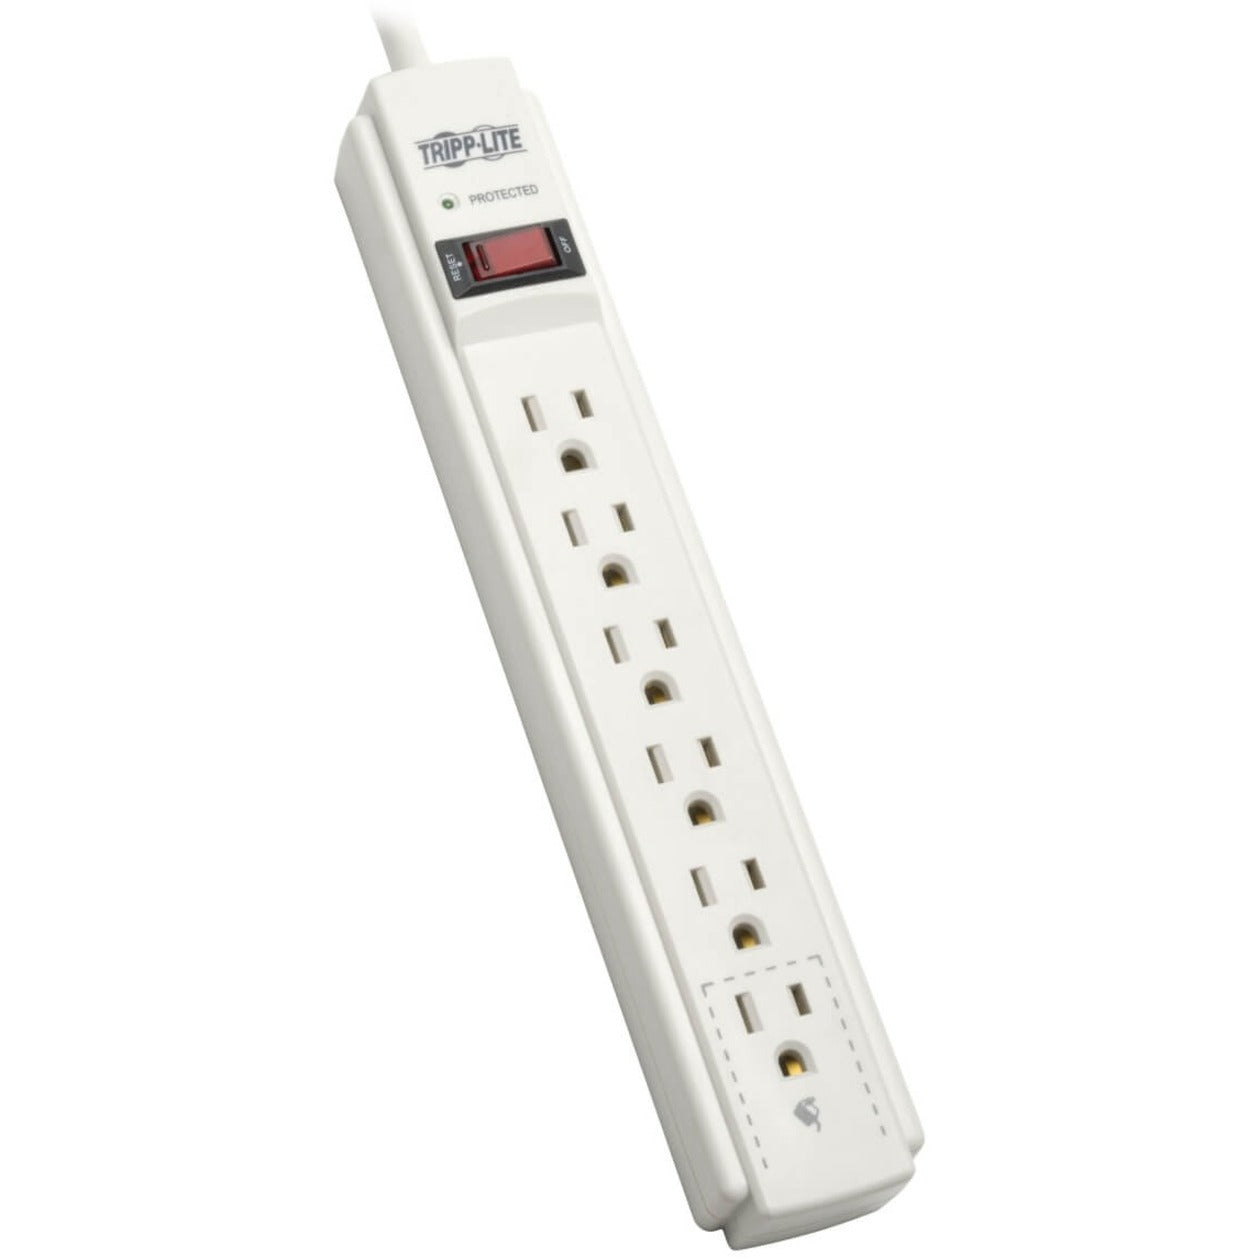 Tripp Lite TLP606TAA 6-Outlet Surge Protector, TAA Compliant, 1800W Power Rating, 790J Surge Energy Rating